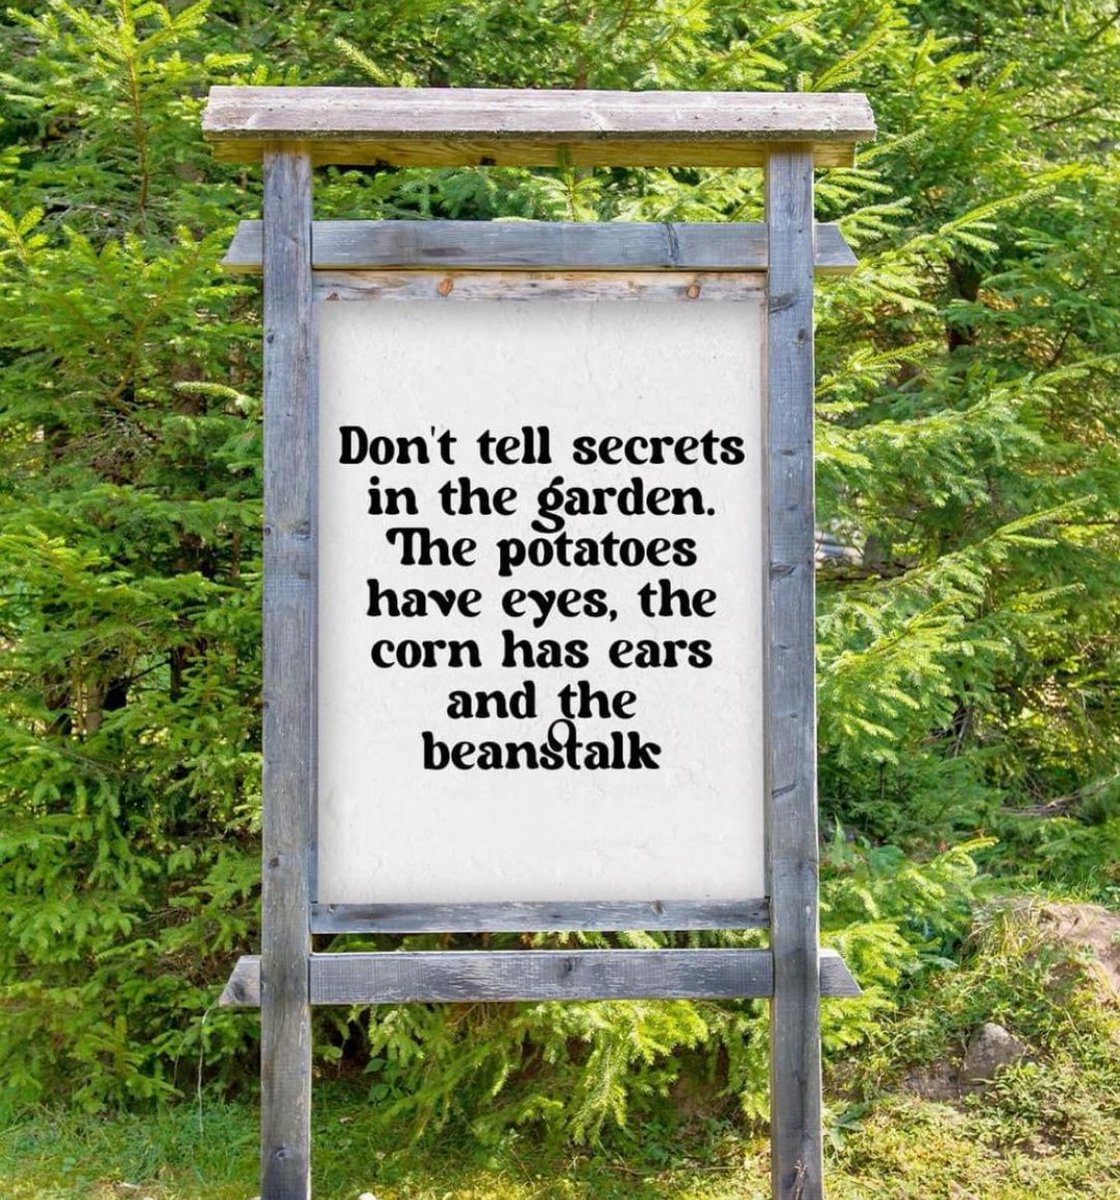 Can you keep a secret? 😂

Hope you've had a great weekend! What have you been up to in the garden?

#kitchengarden #growing #growyourown #gardening #plot #allotment #growyourownfood #allotmentsuk #homegrown #garden #gardenlove #gardeninspiration